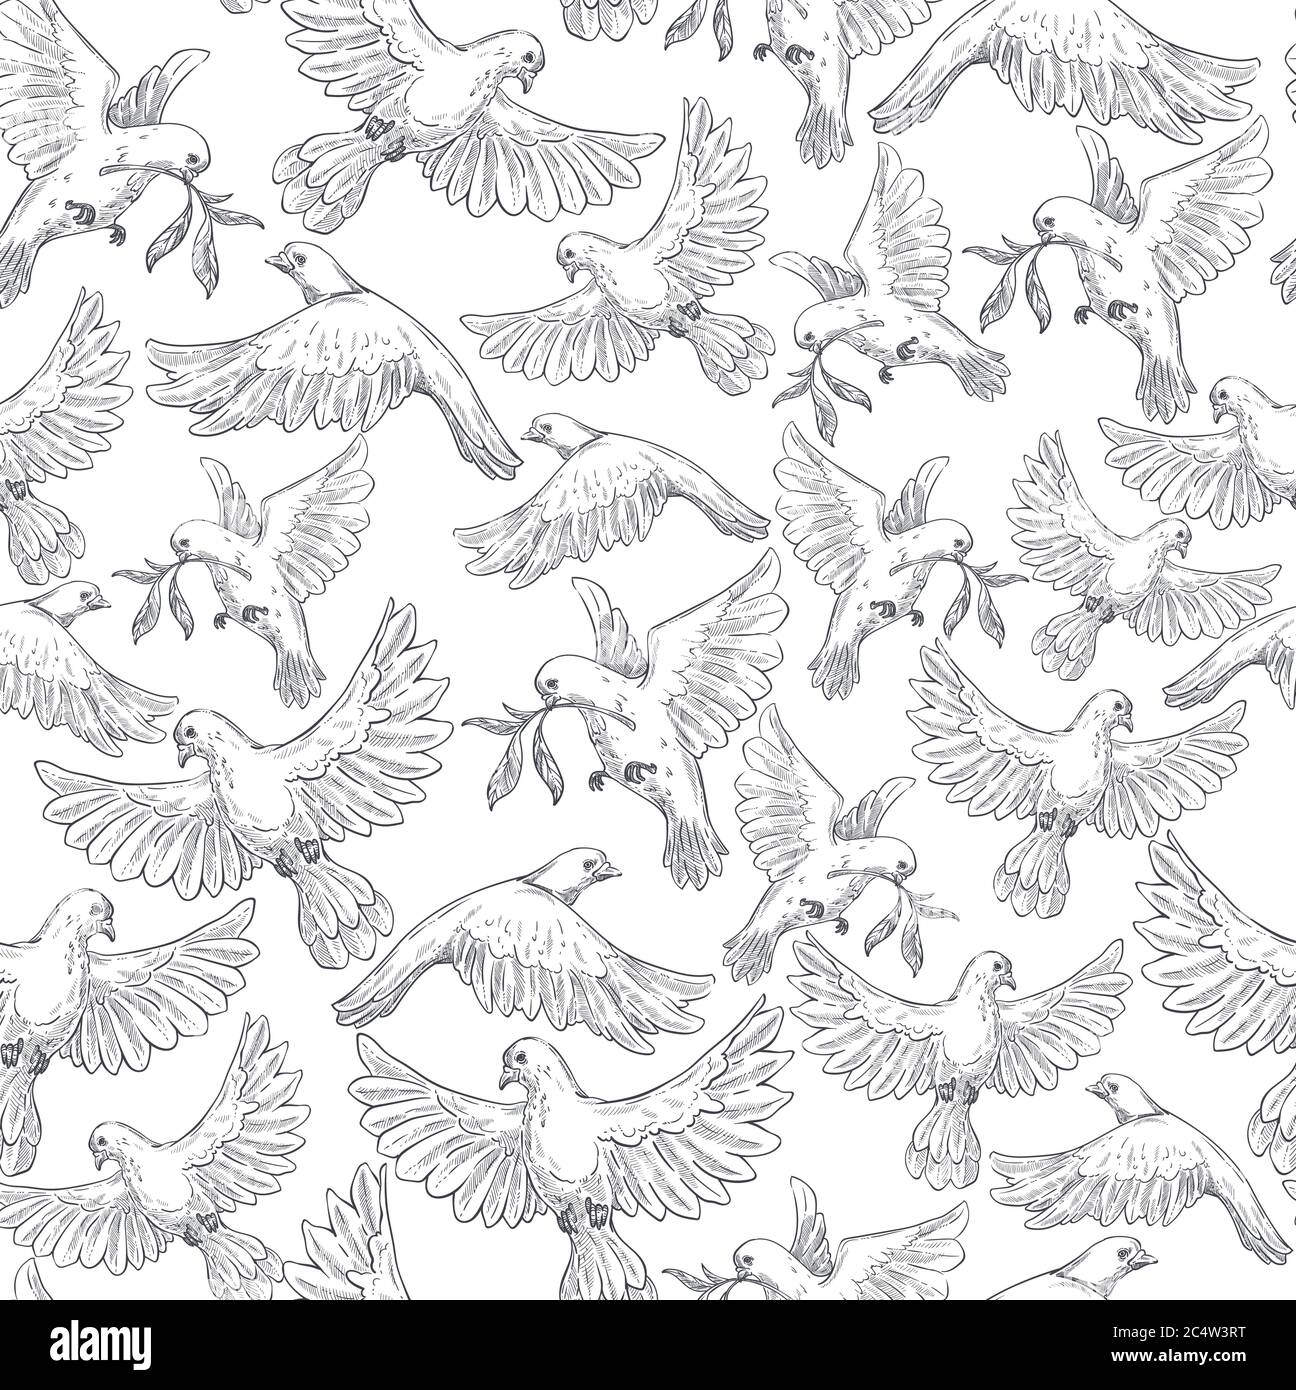 Flying pigeons carrying branches colorless seamless pattern vector Stock Vector